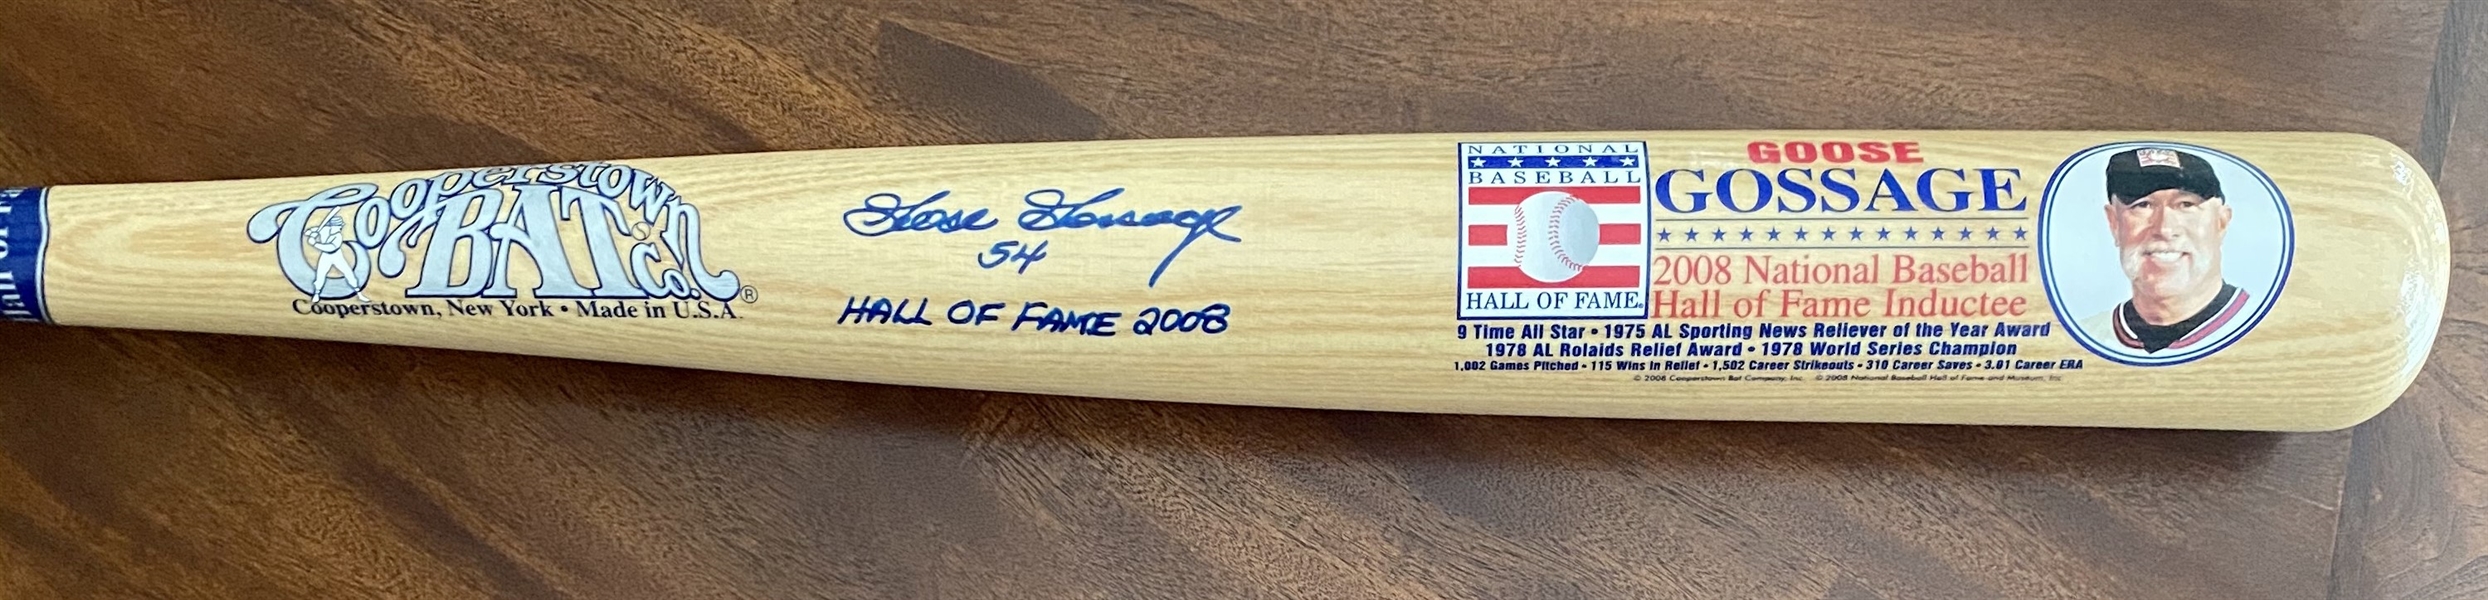 New York Yankees Goose Gossage Signed Cooperstown Bat With Hall Of Fame 2008 Inscription Limited Edition